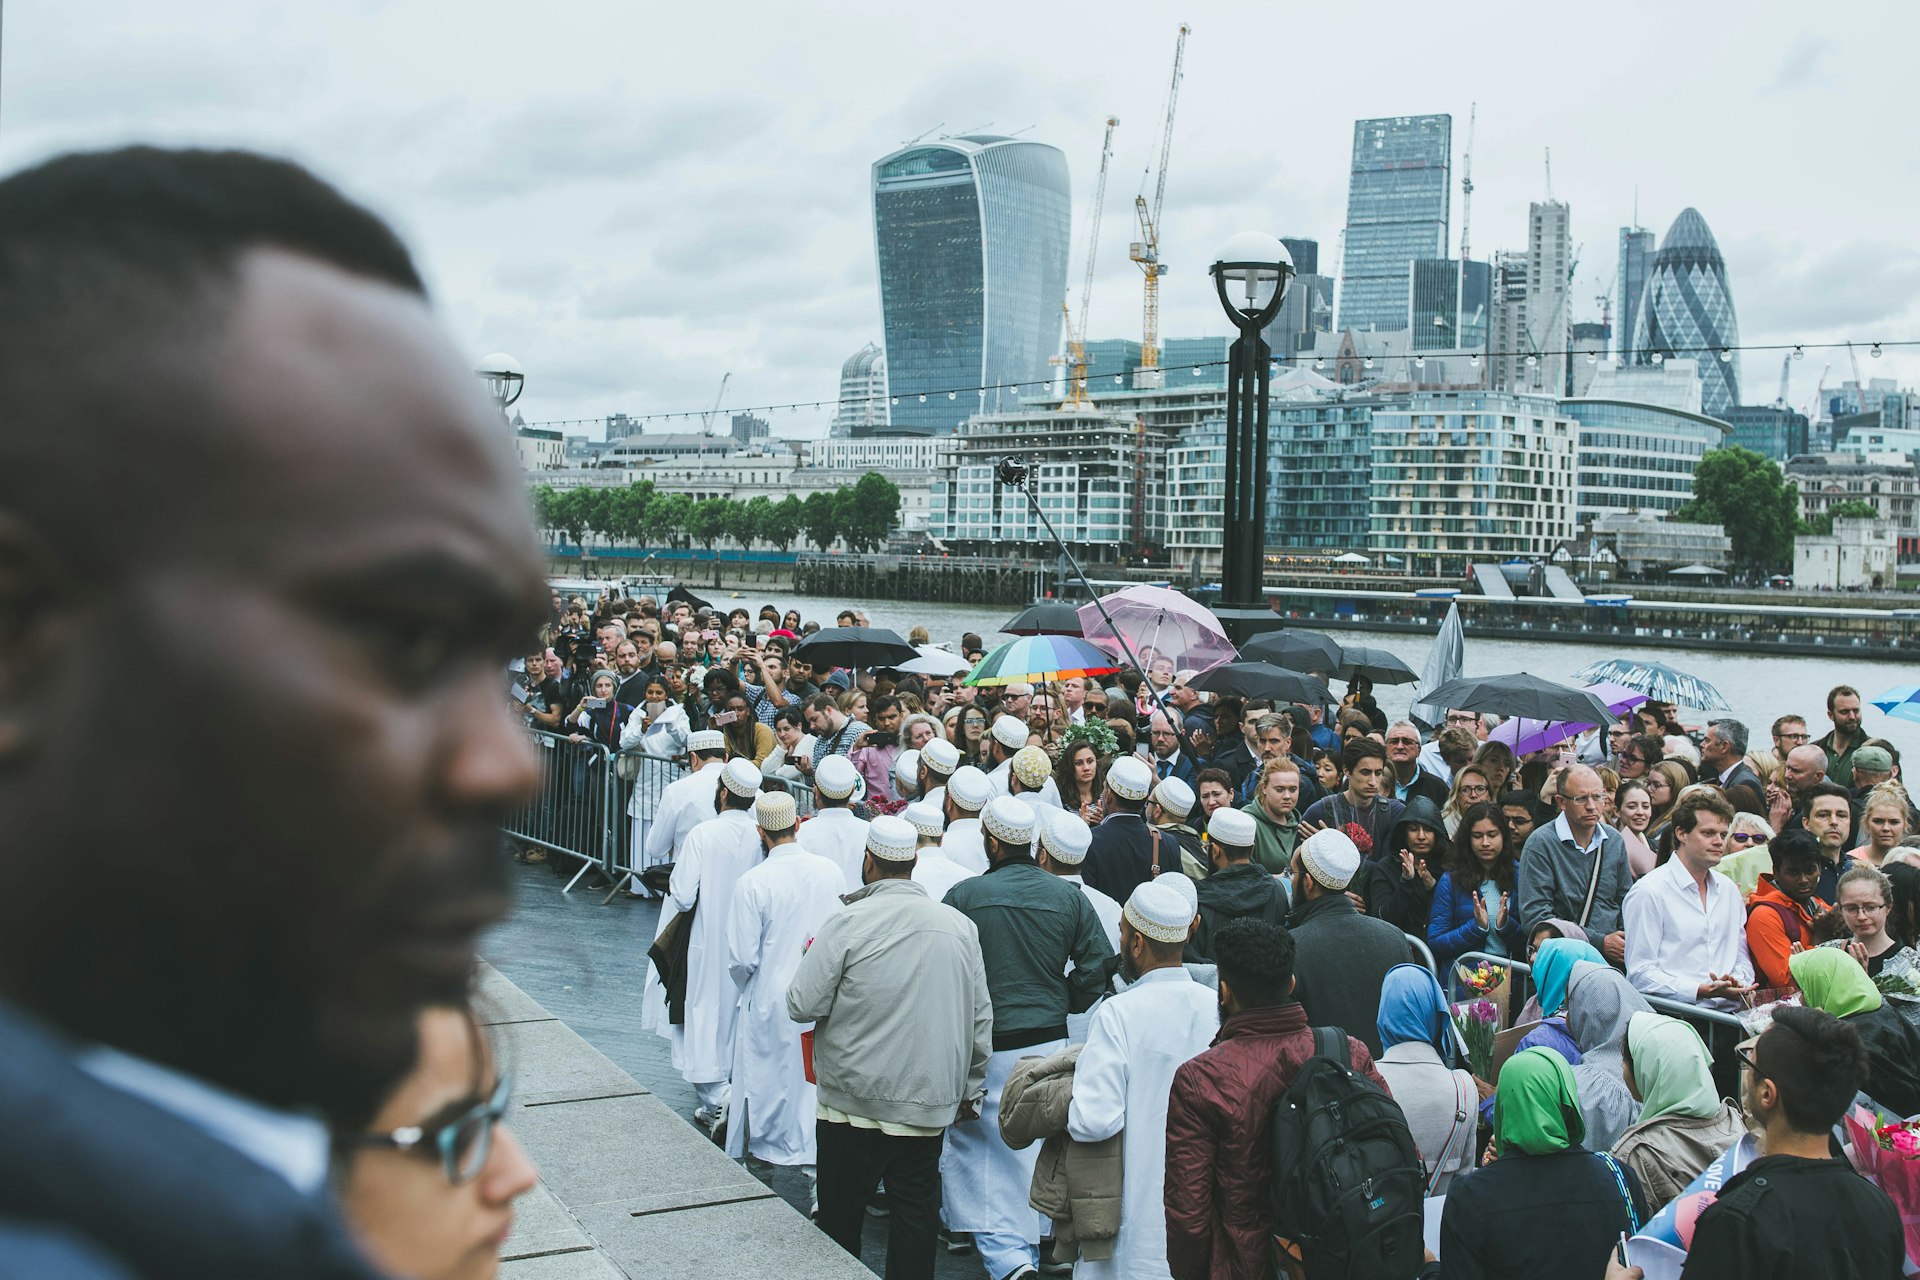 Londoners hold an emotional tribute to those killed by terror